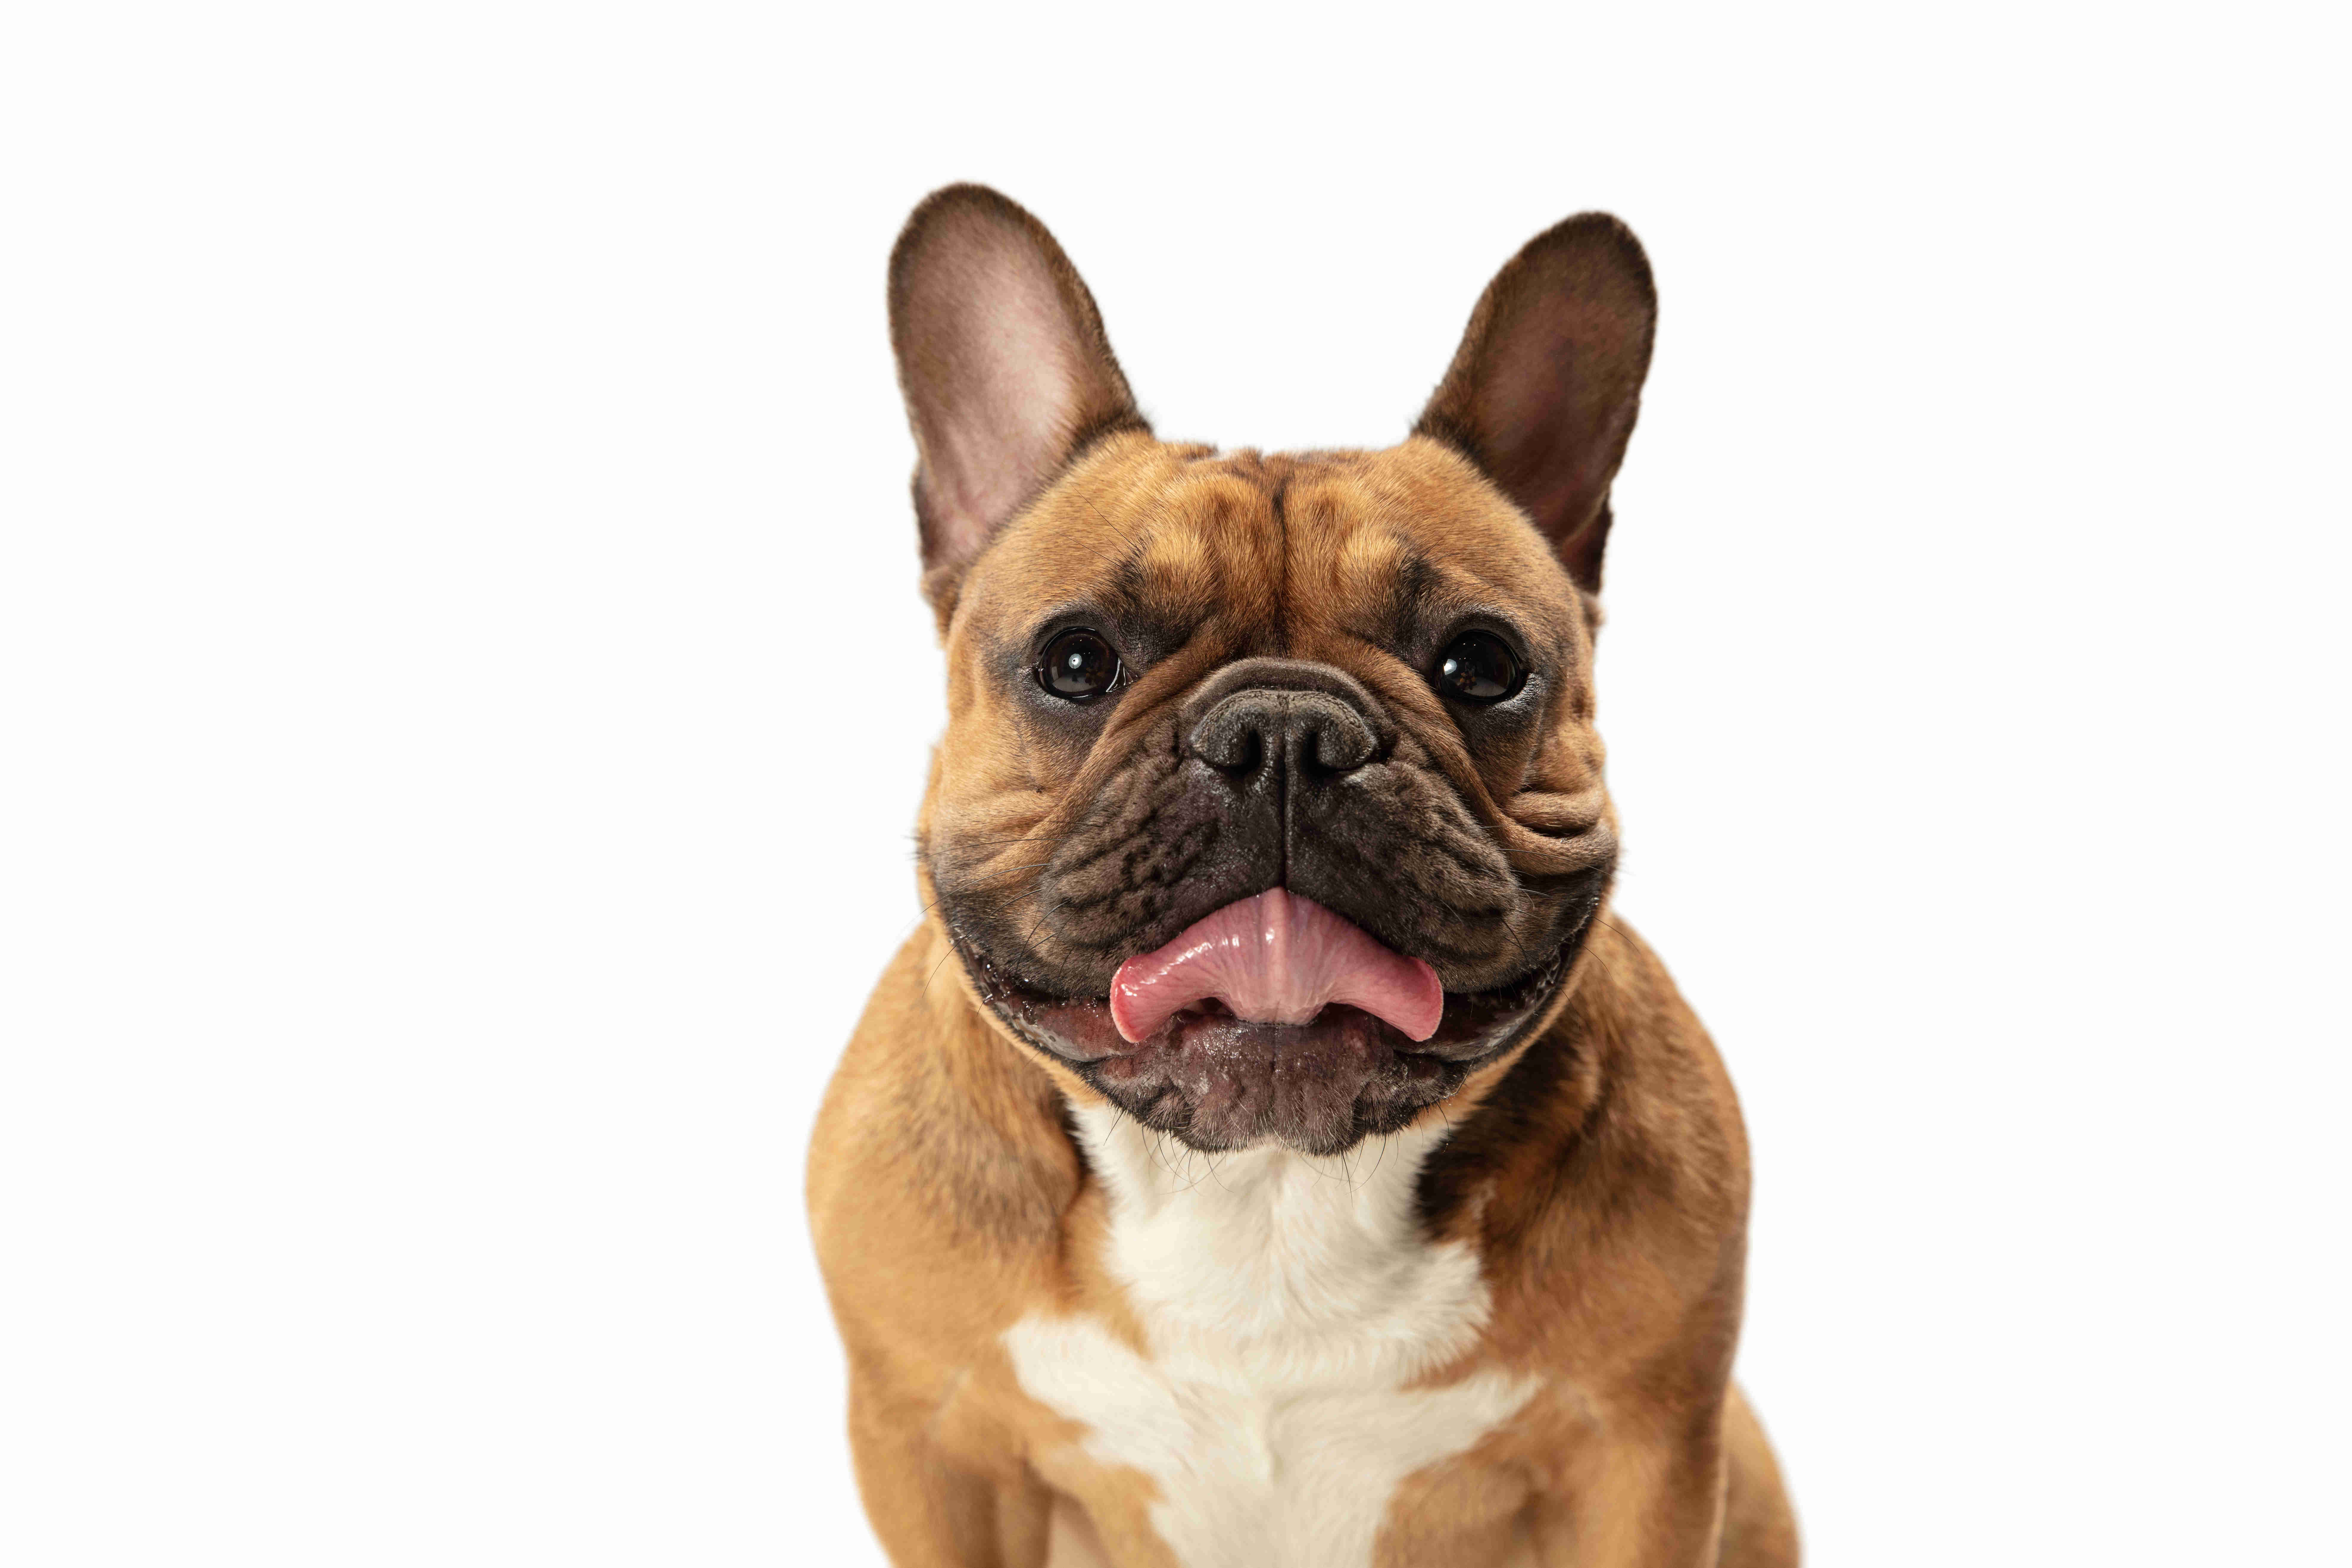 10 Tips to Help Your French Bulldog Puppy Adjust to Their New Home